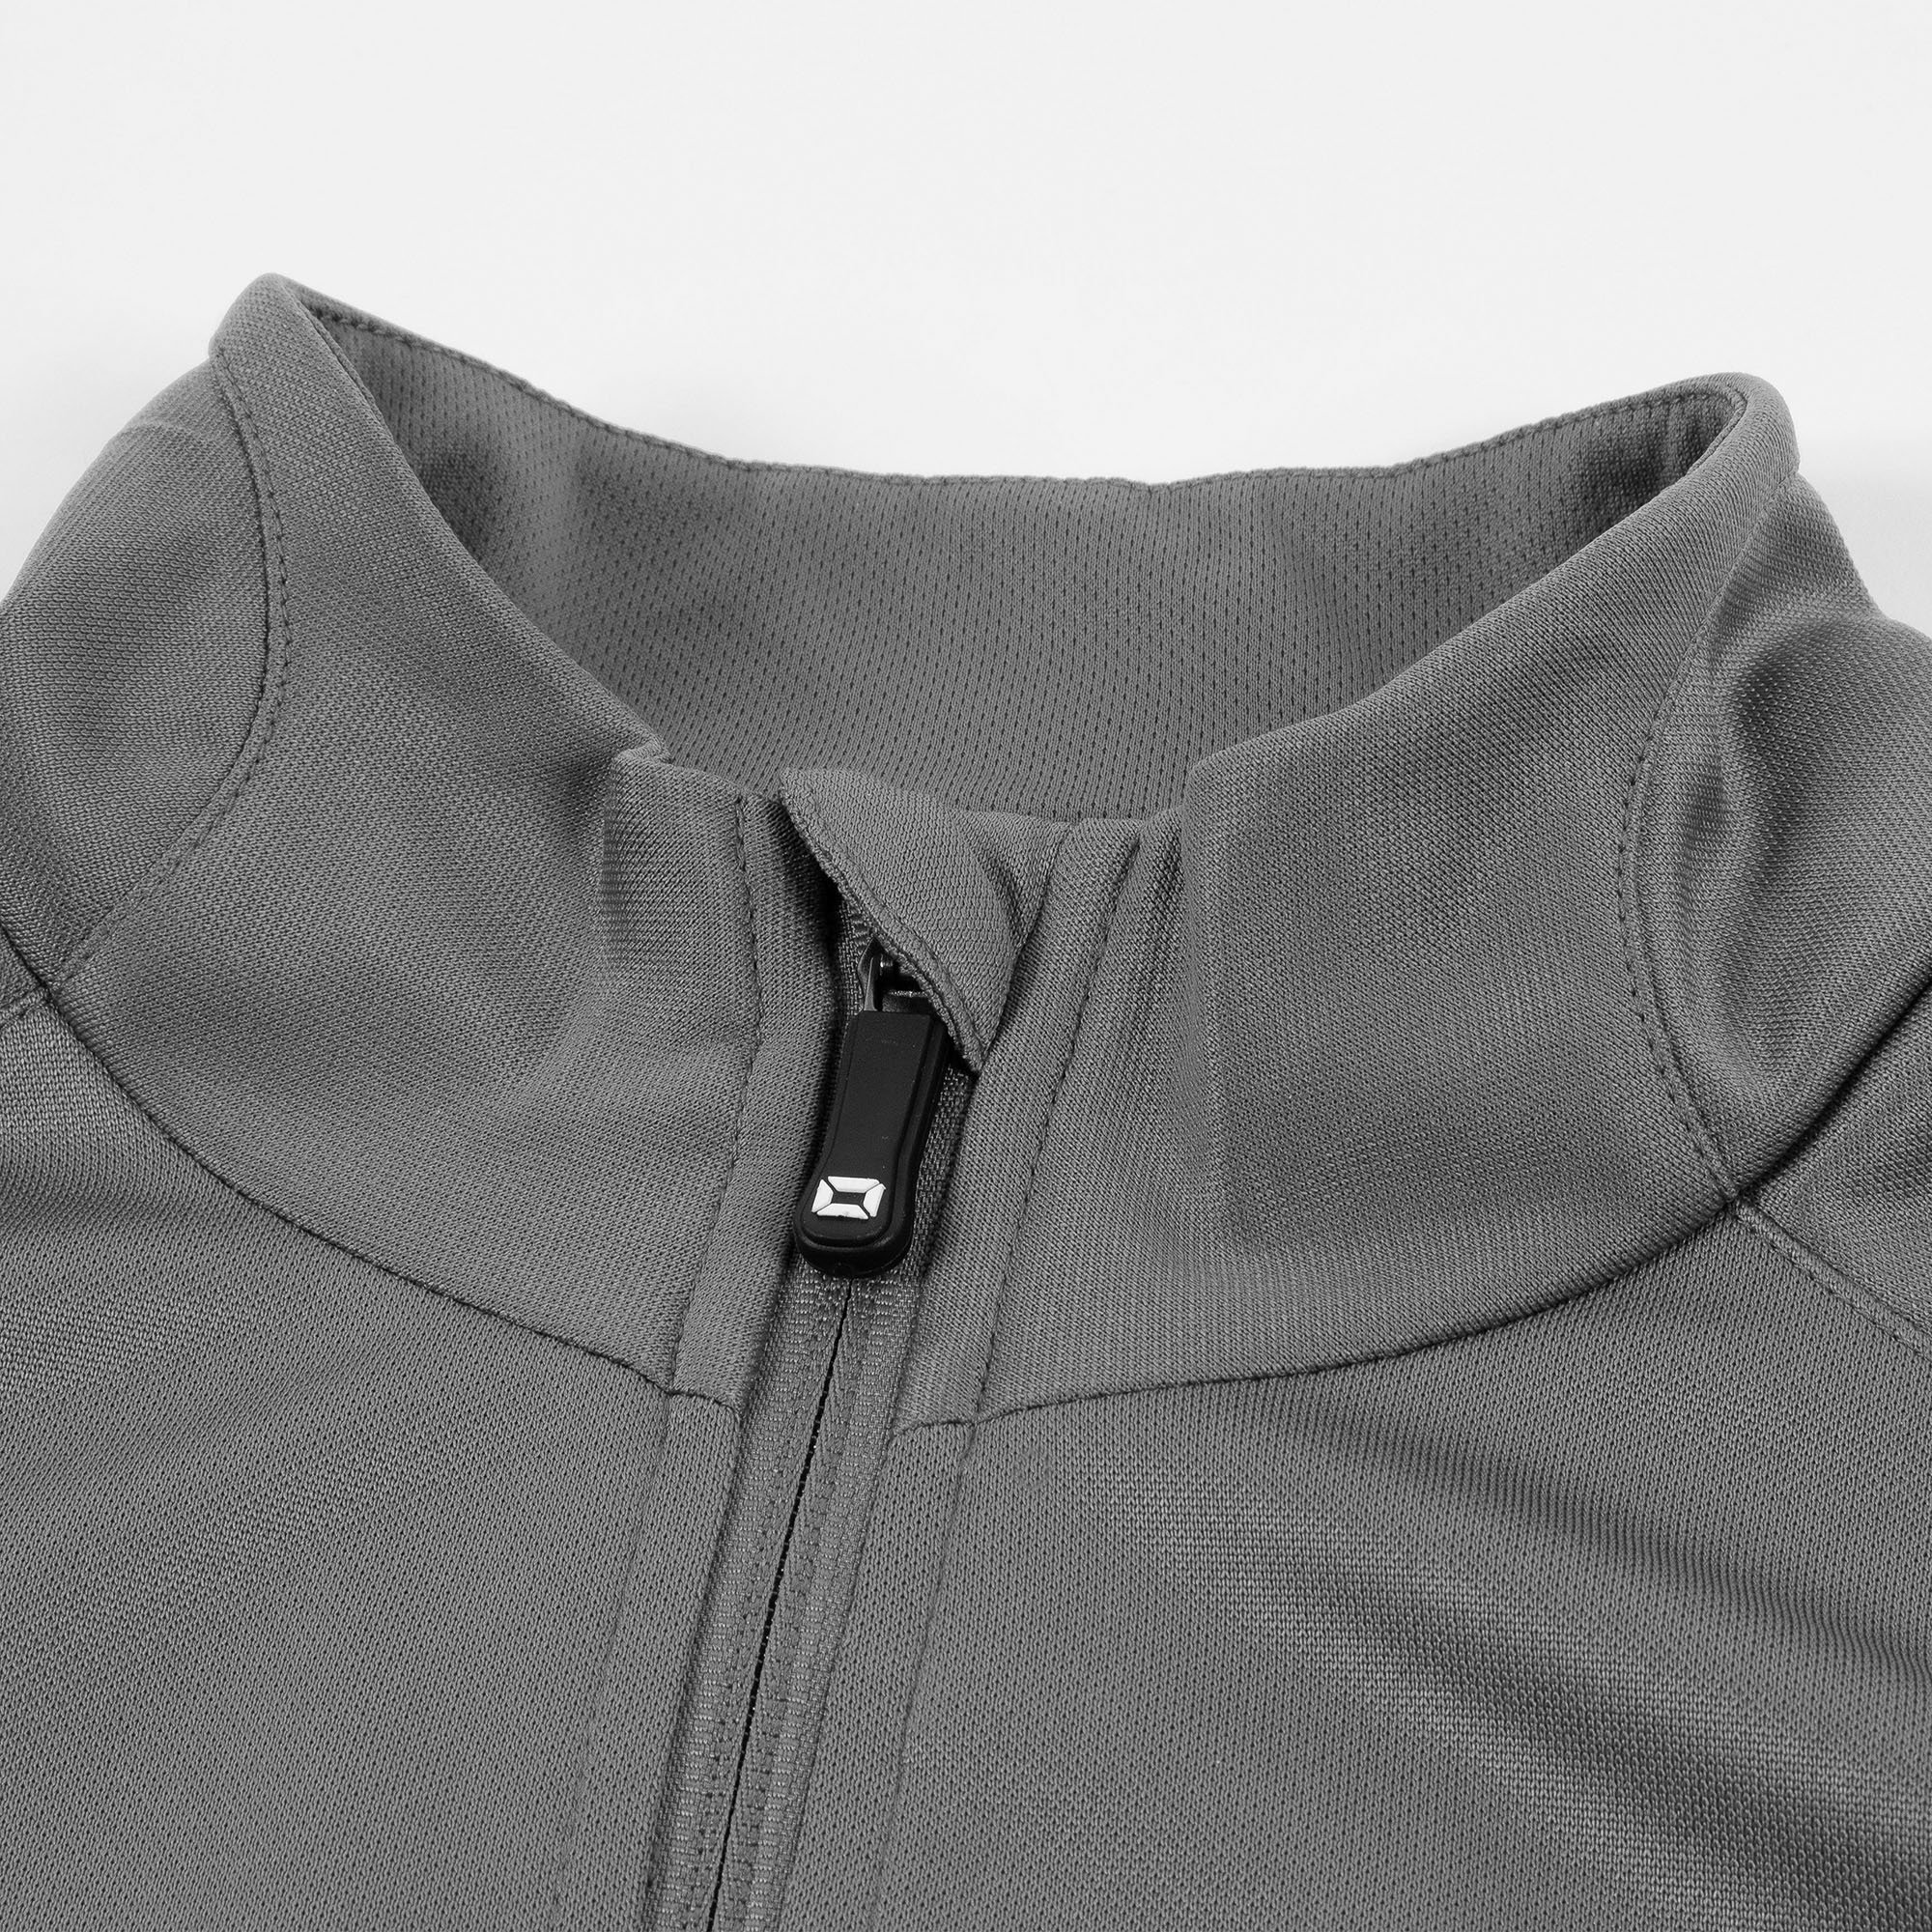 Stanno First Full Zip Top